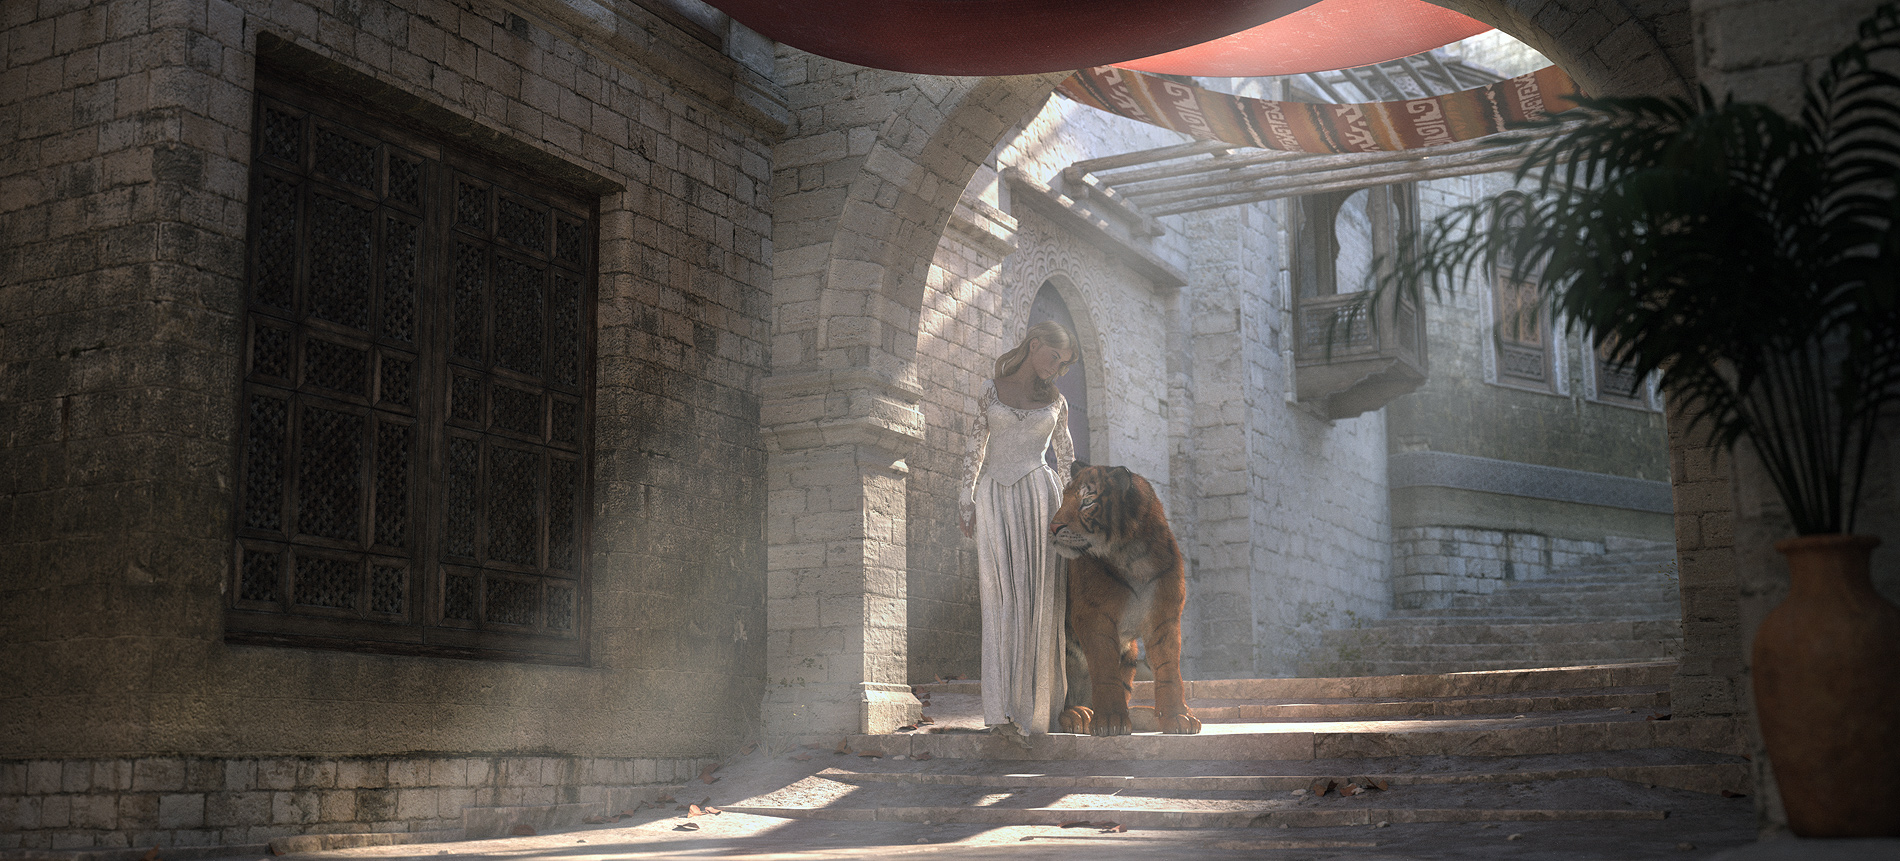 The Streets of Morocco by: Stonemason, 3D Models by Daz 3D